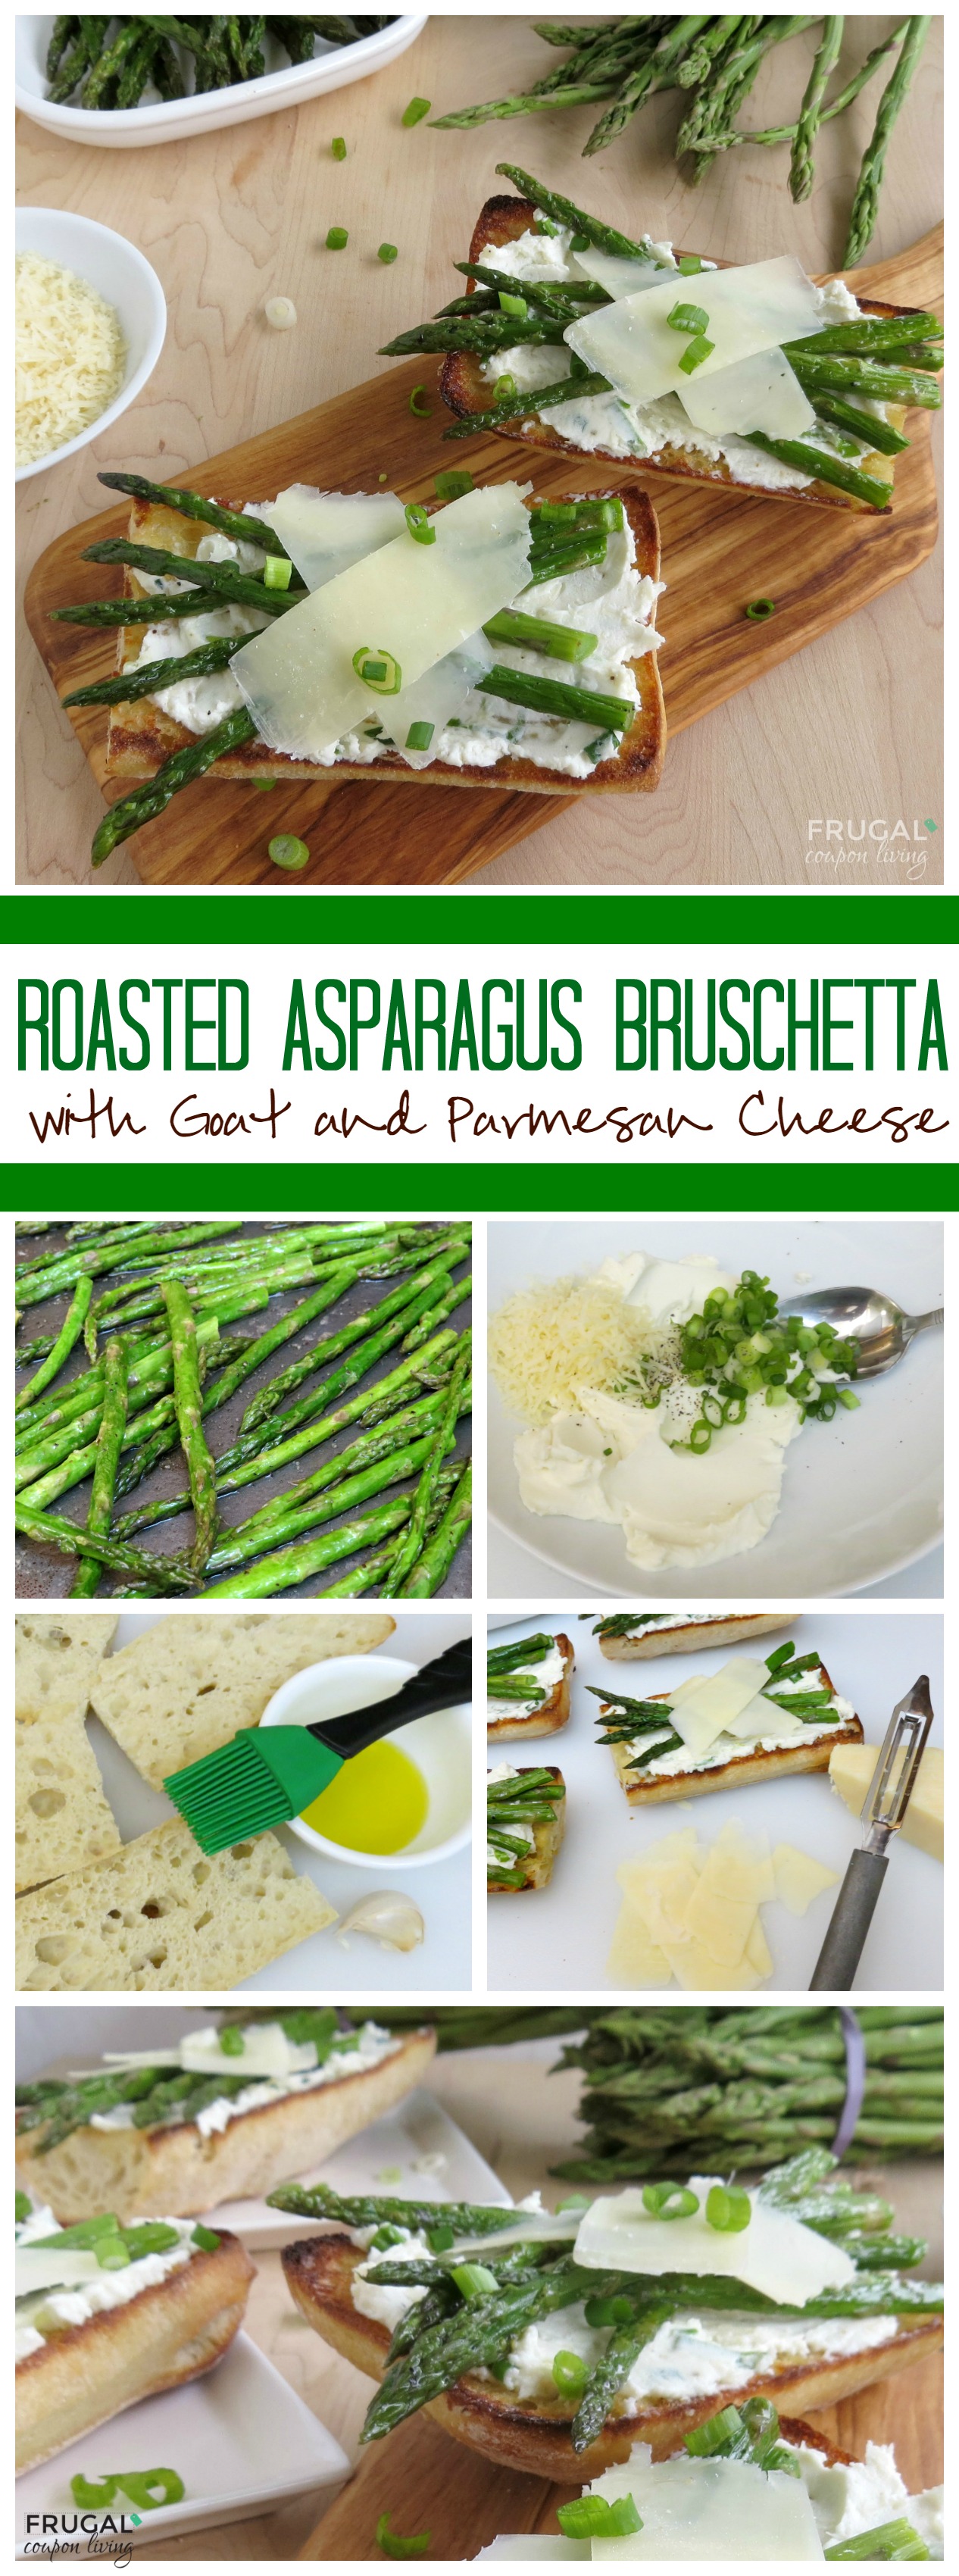 Roasted-Asparagus-Bruschetta-Collage-frugal-coupon-living